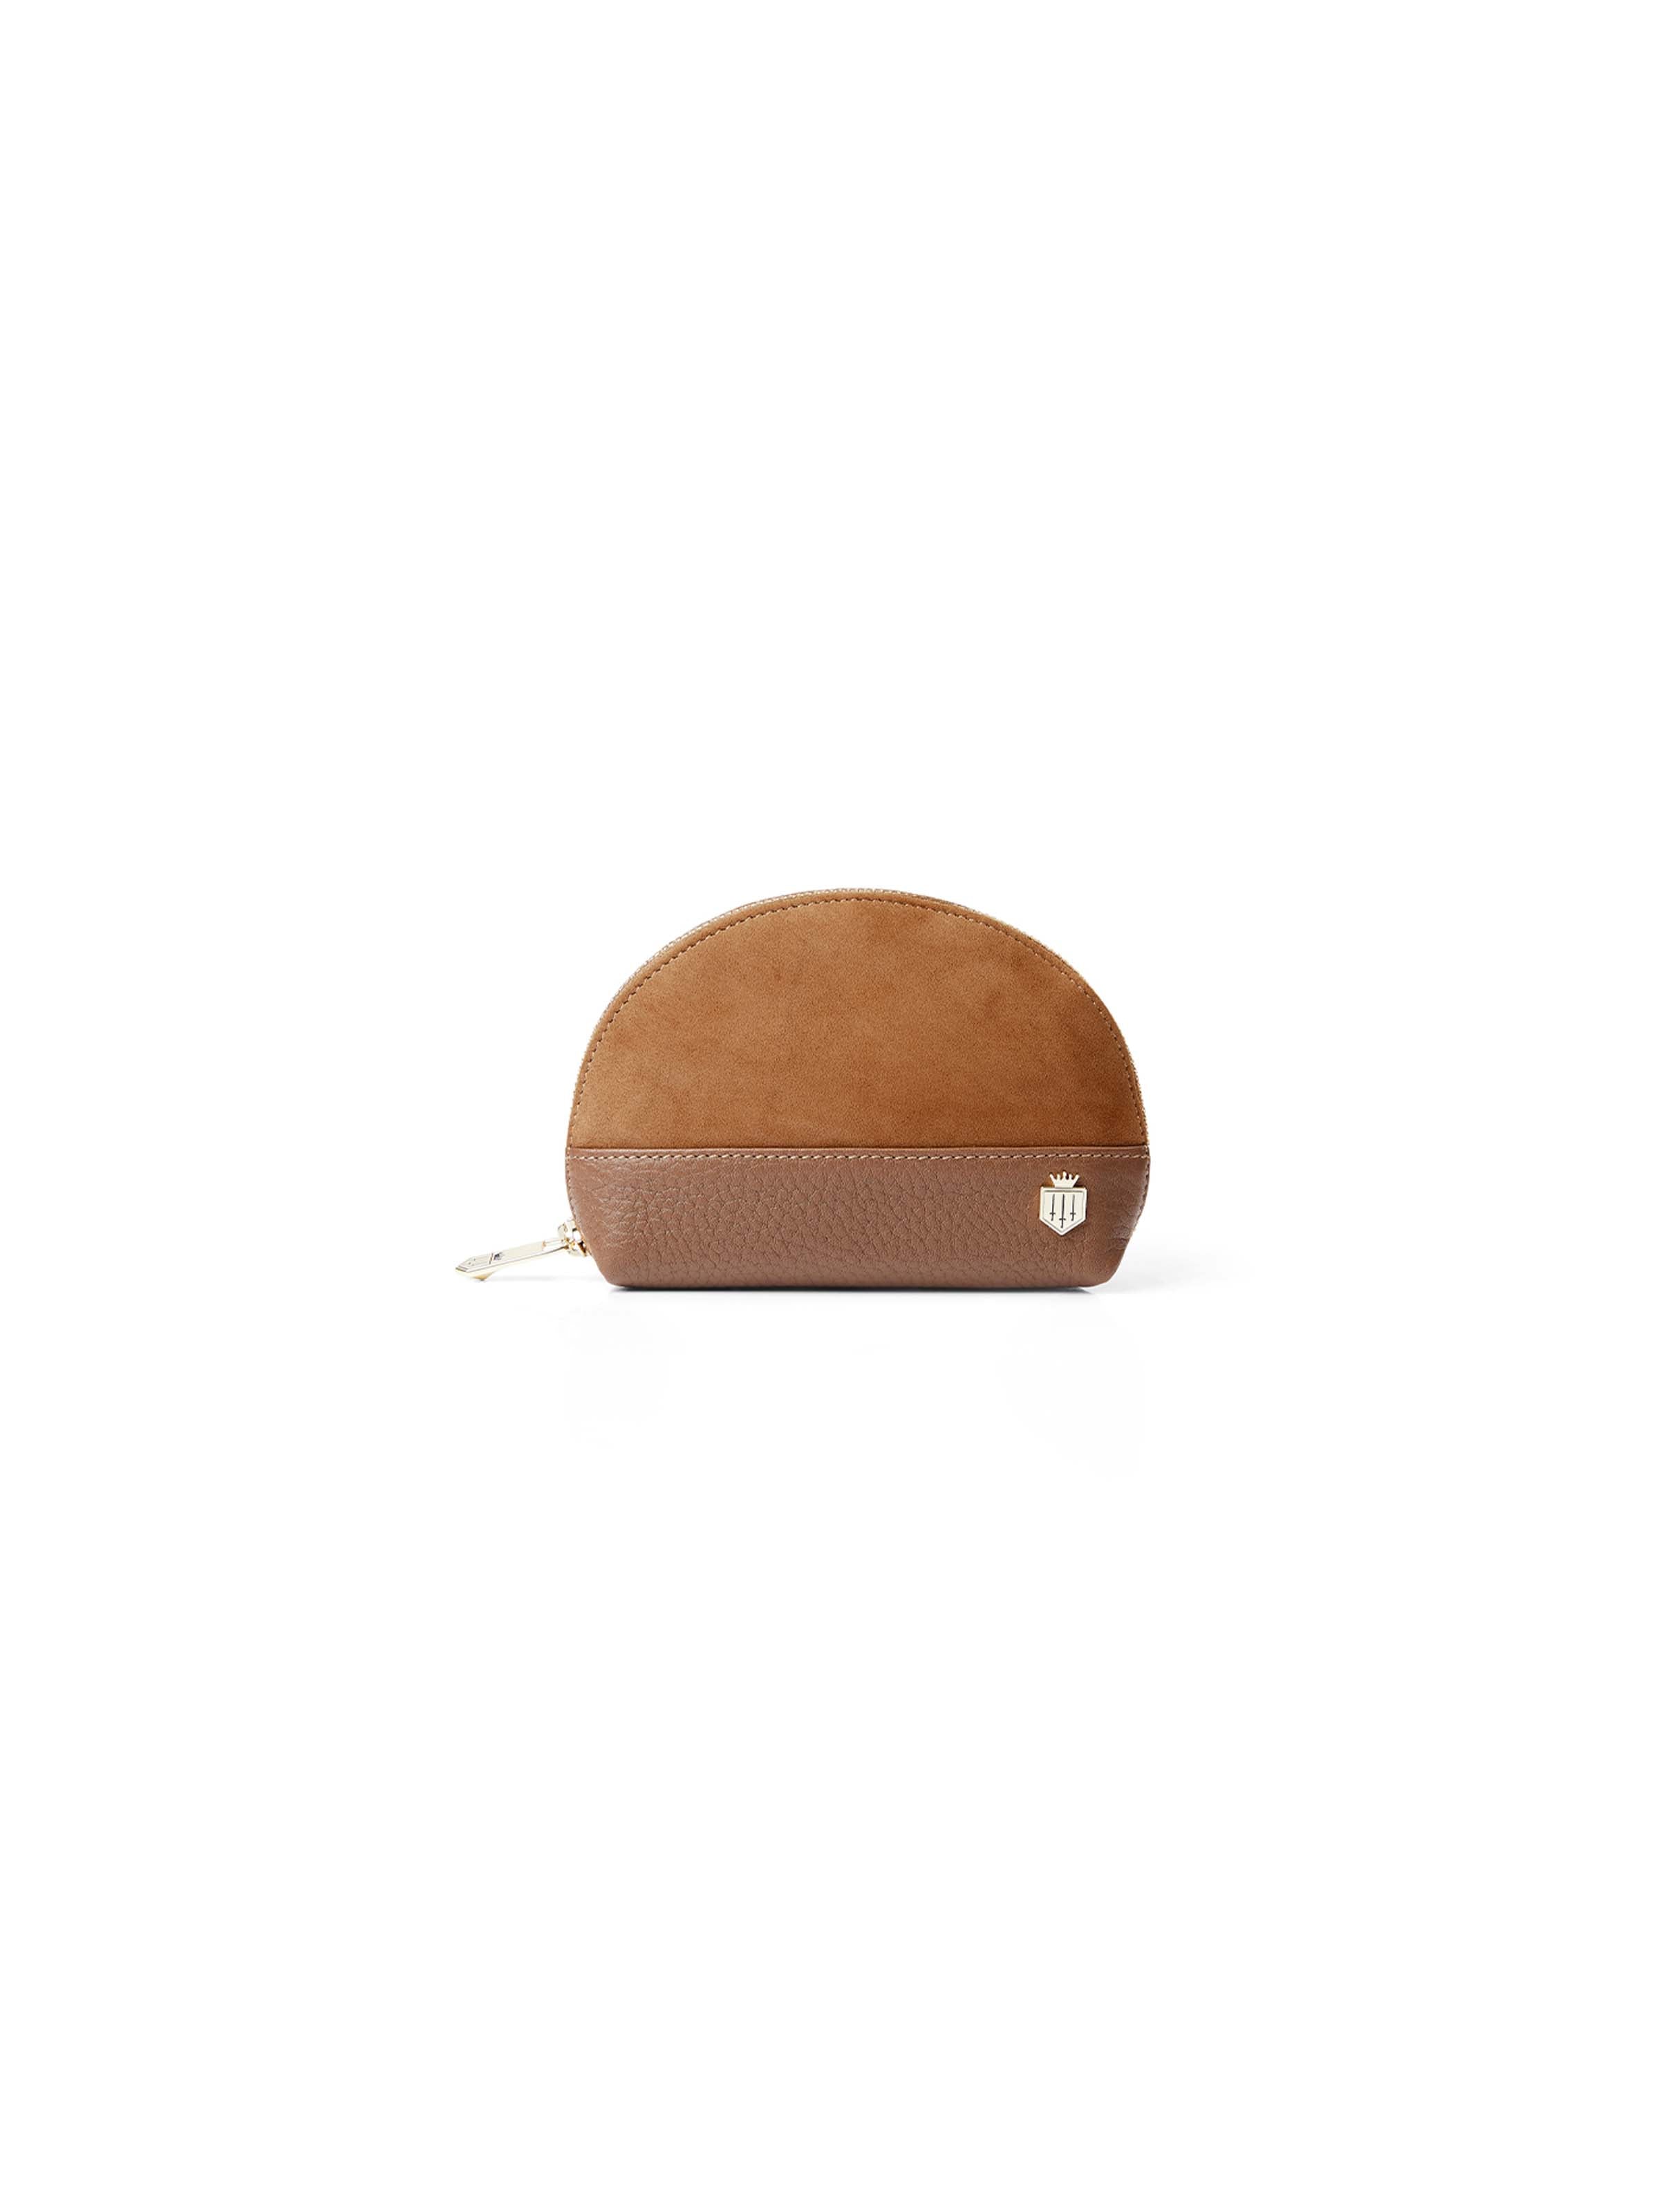 The Chiltern Coin Purse - Tan Suede